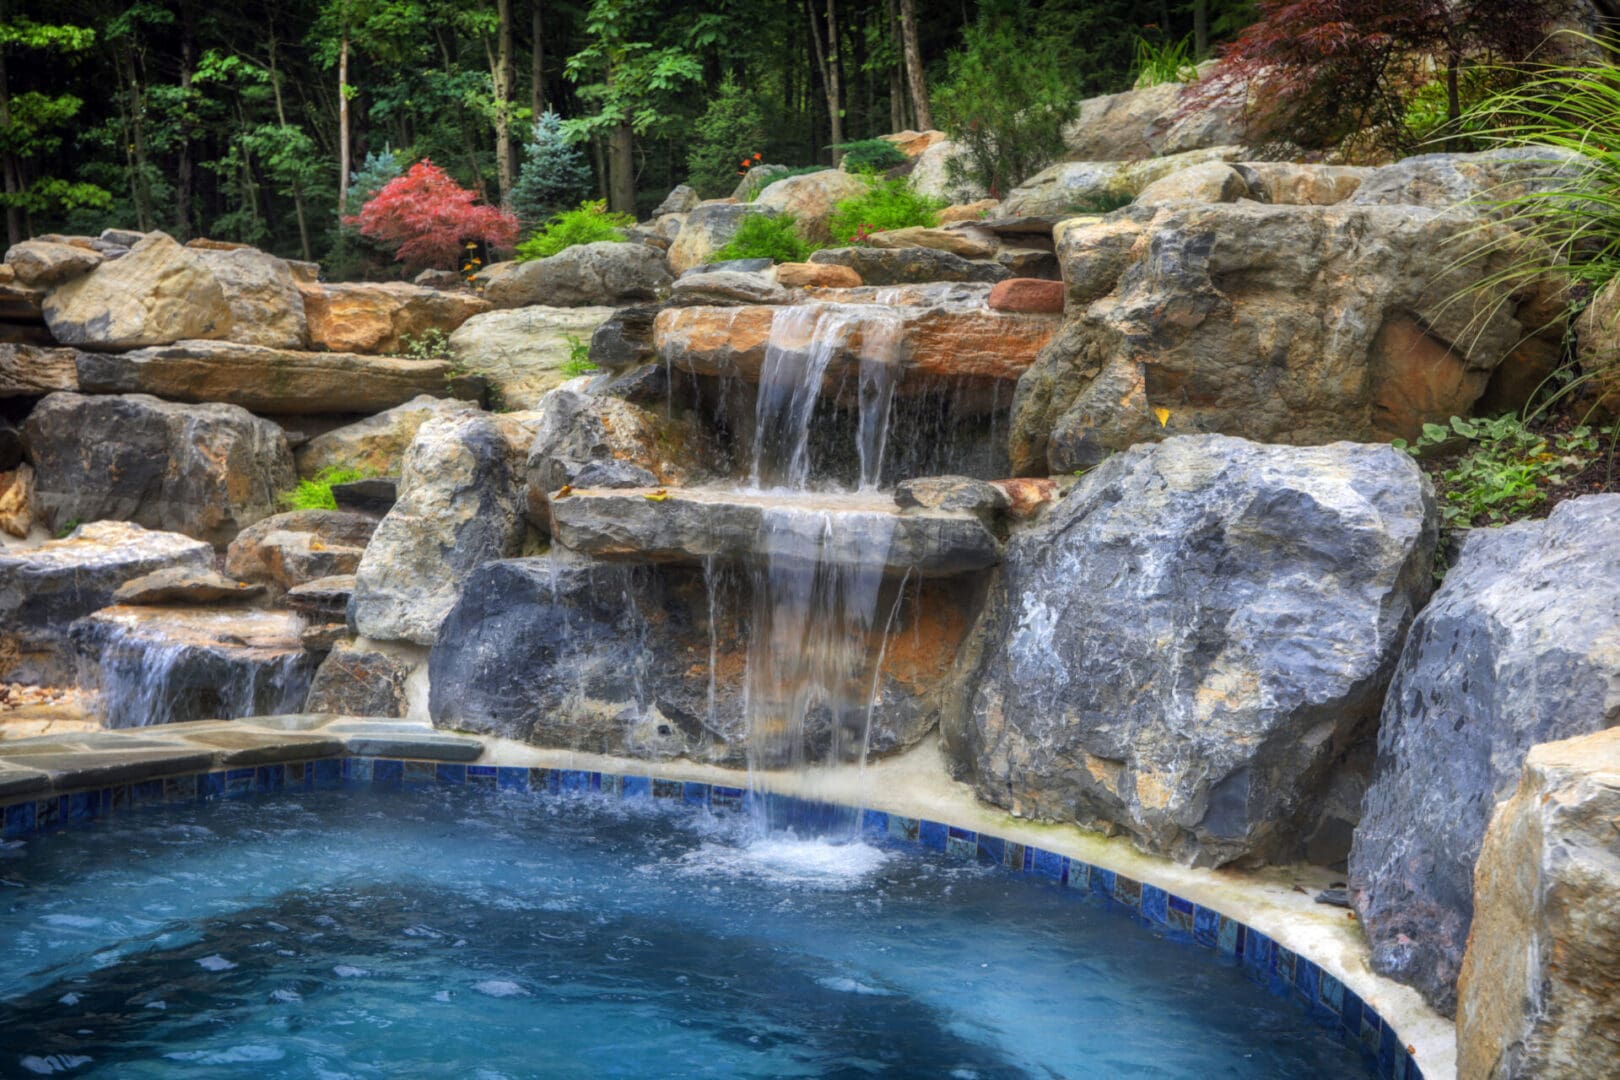 A pool with water features surrounded by rocks.